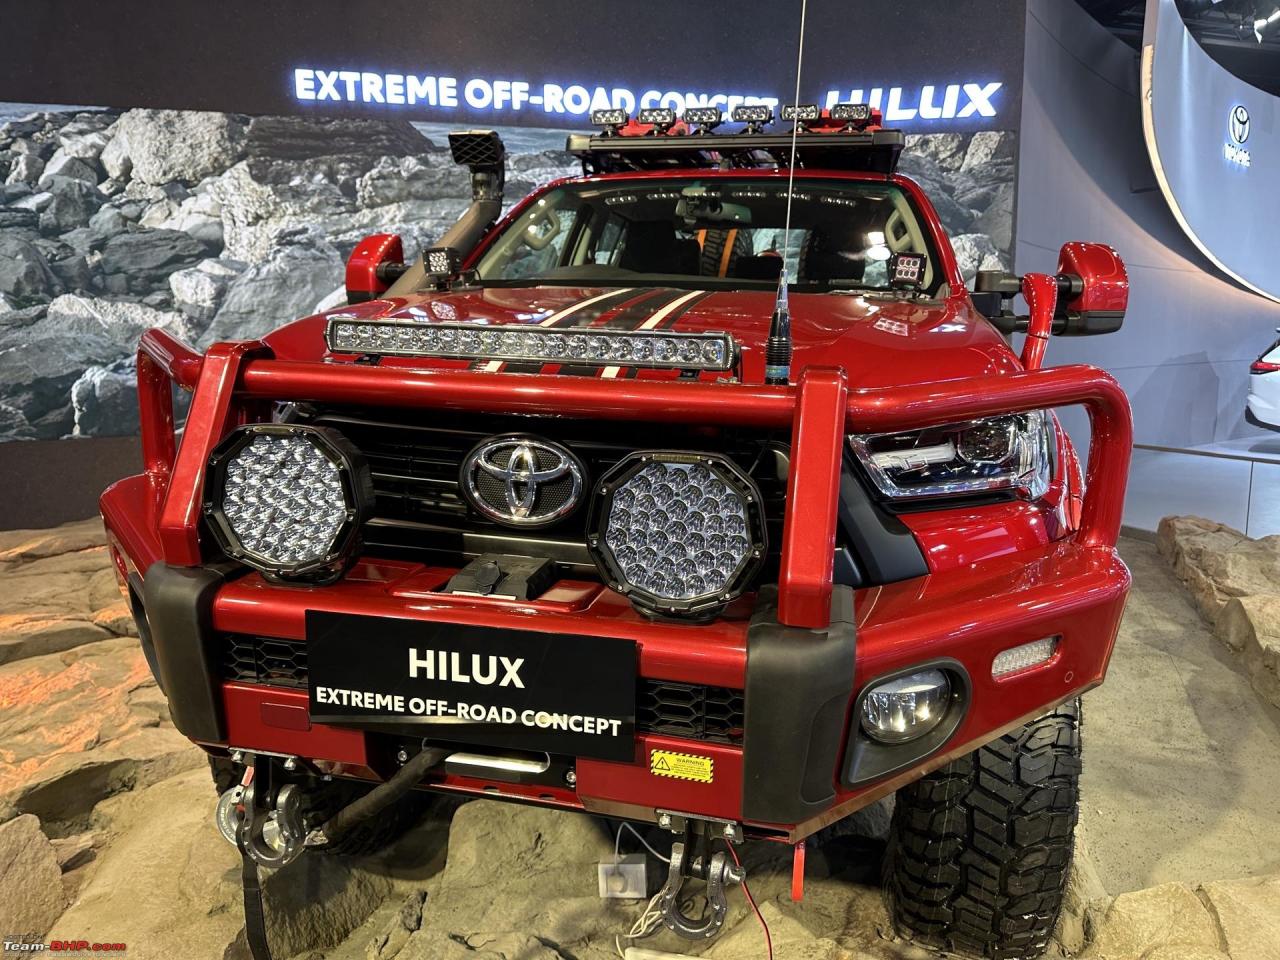 Toyota Hilux Extreme Off-Road concept showcased – Now in pictures